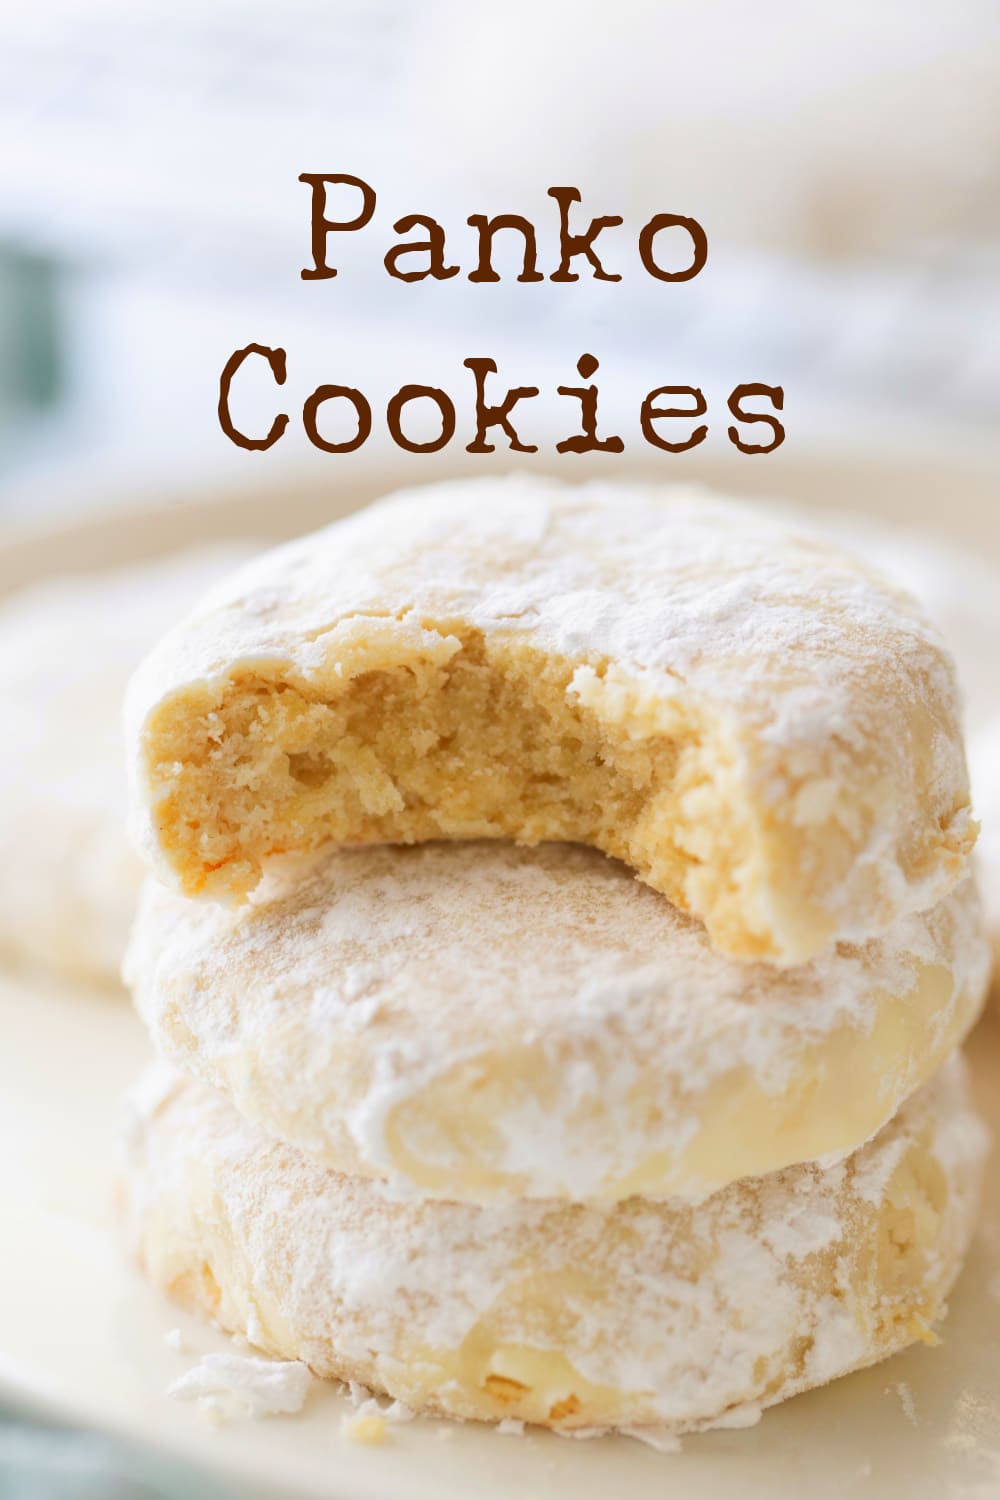 A sweet butter, meltaway cookie, made with crunchy Panko breadcrumbs. The addition of Panko brings a distinct texture to this crumb cookie recipe that would otherwise simply melt in your mouth.  via @cmpollak1